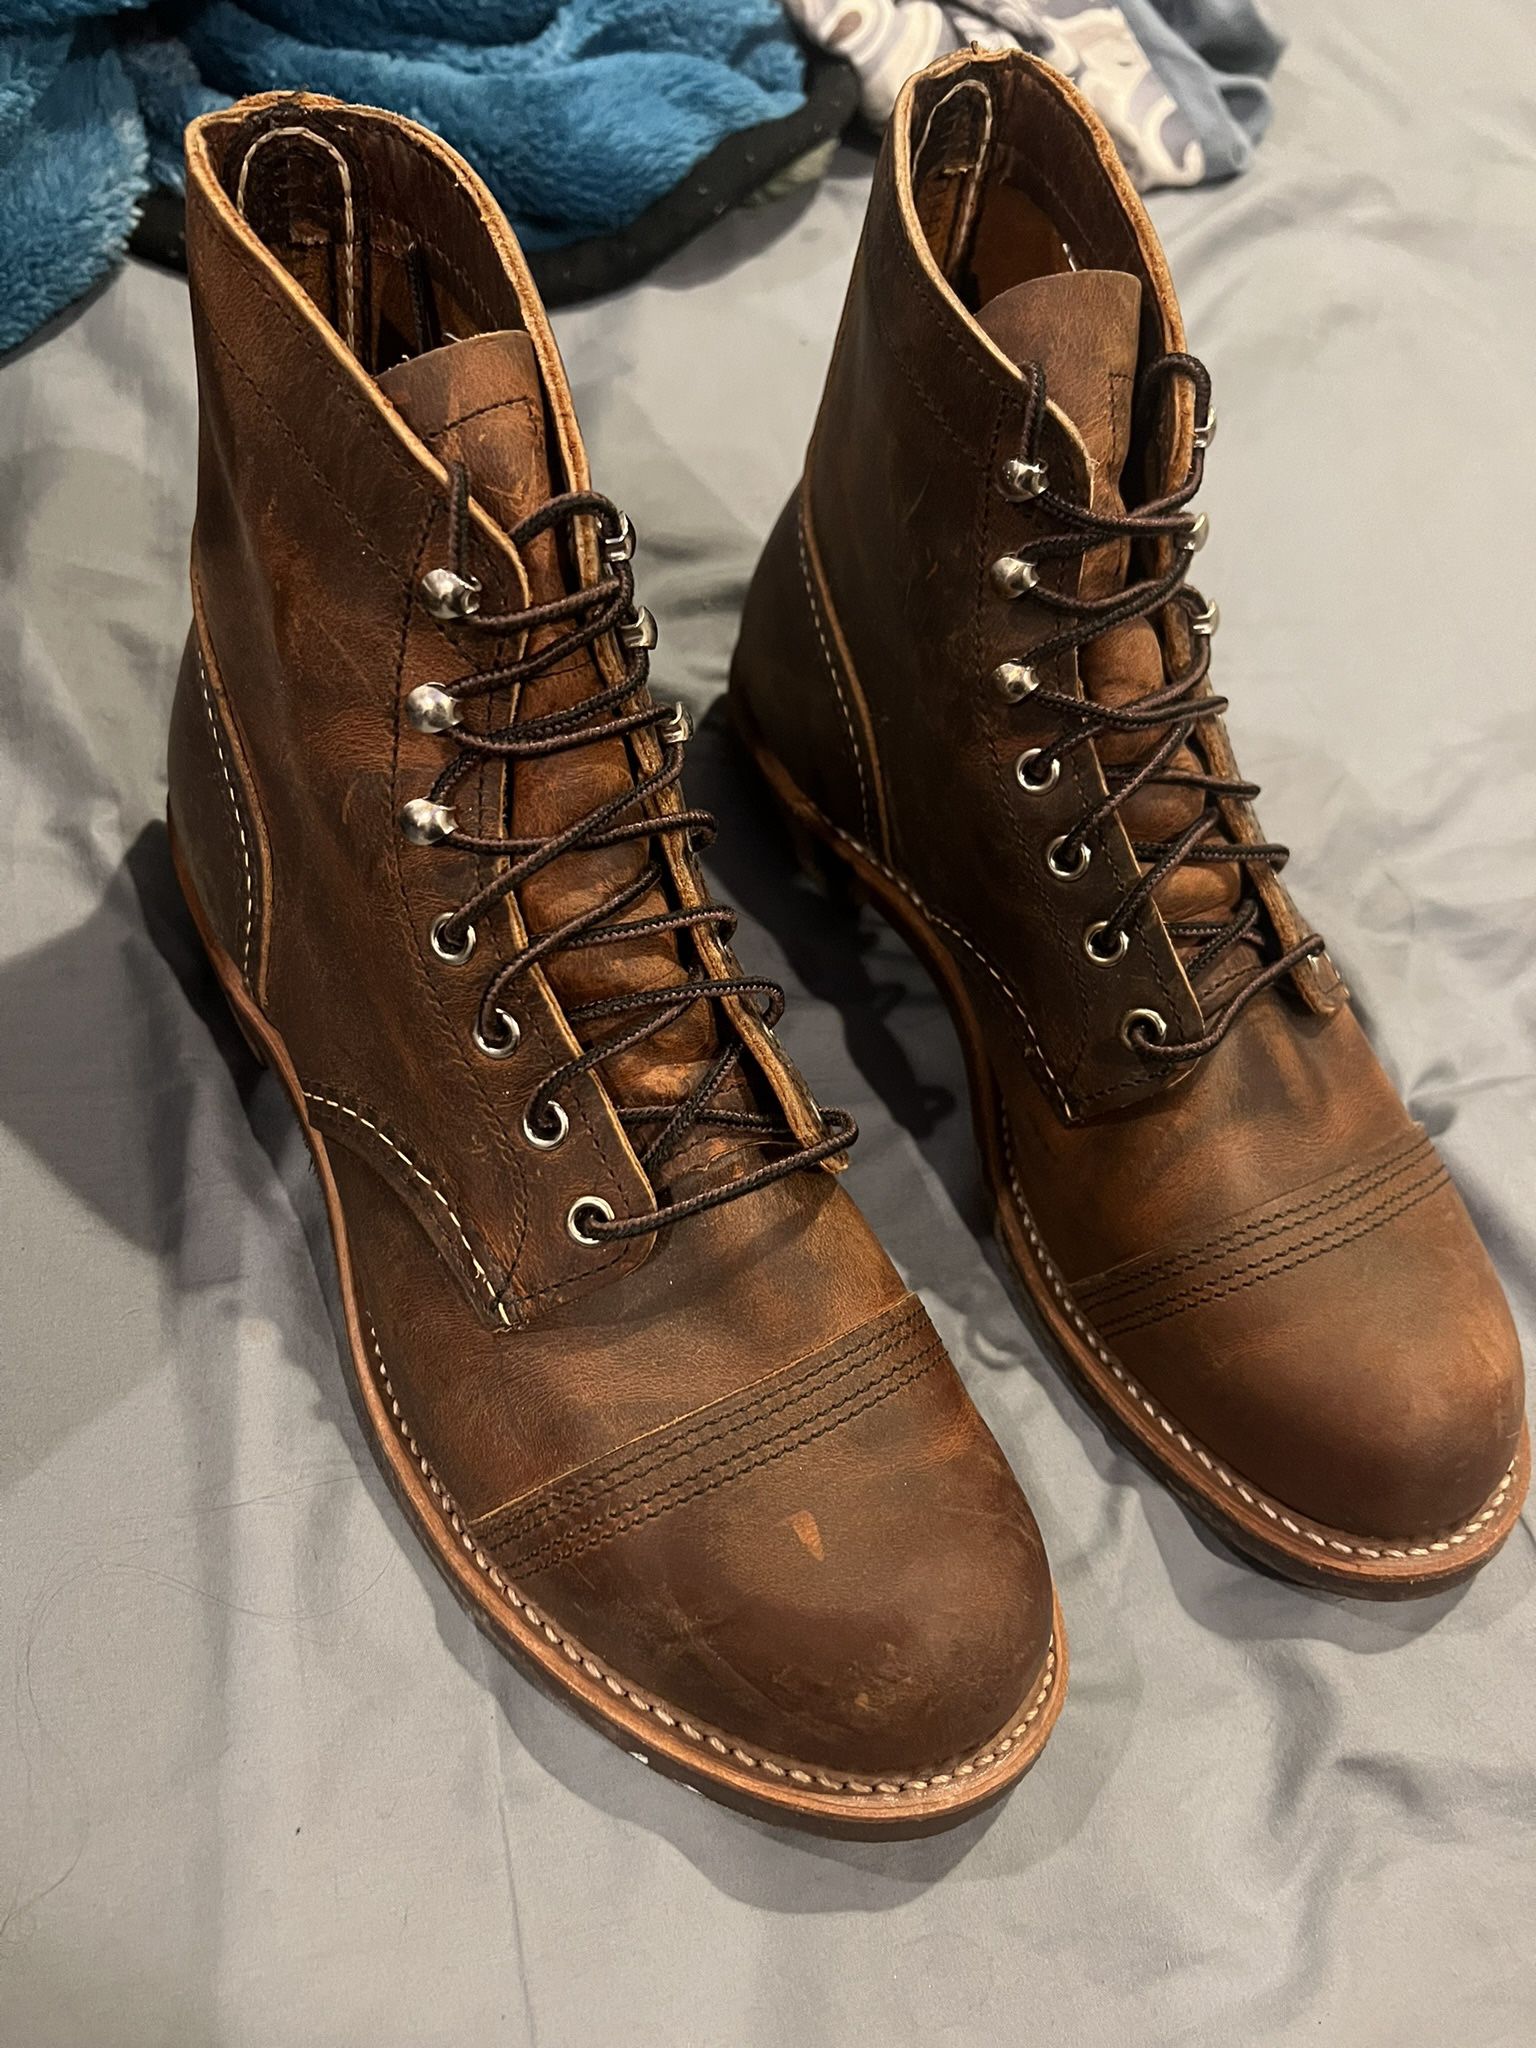 Men’s 6-inch Red Wing Boots For Sale